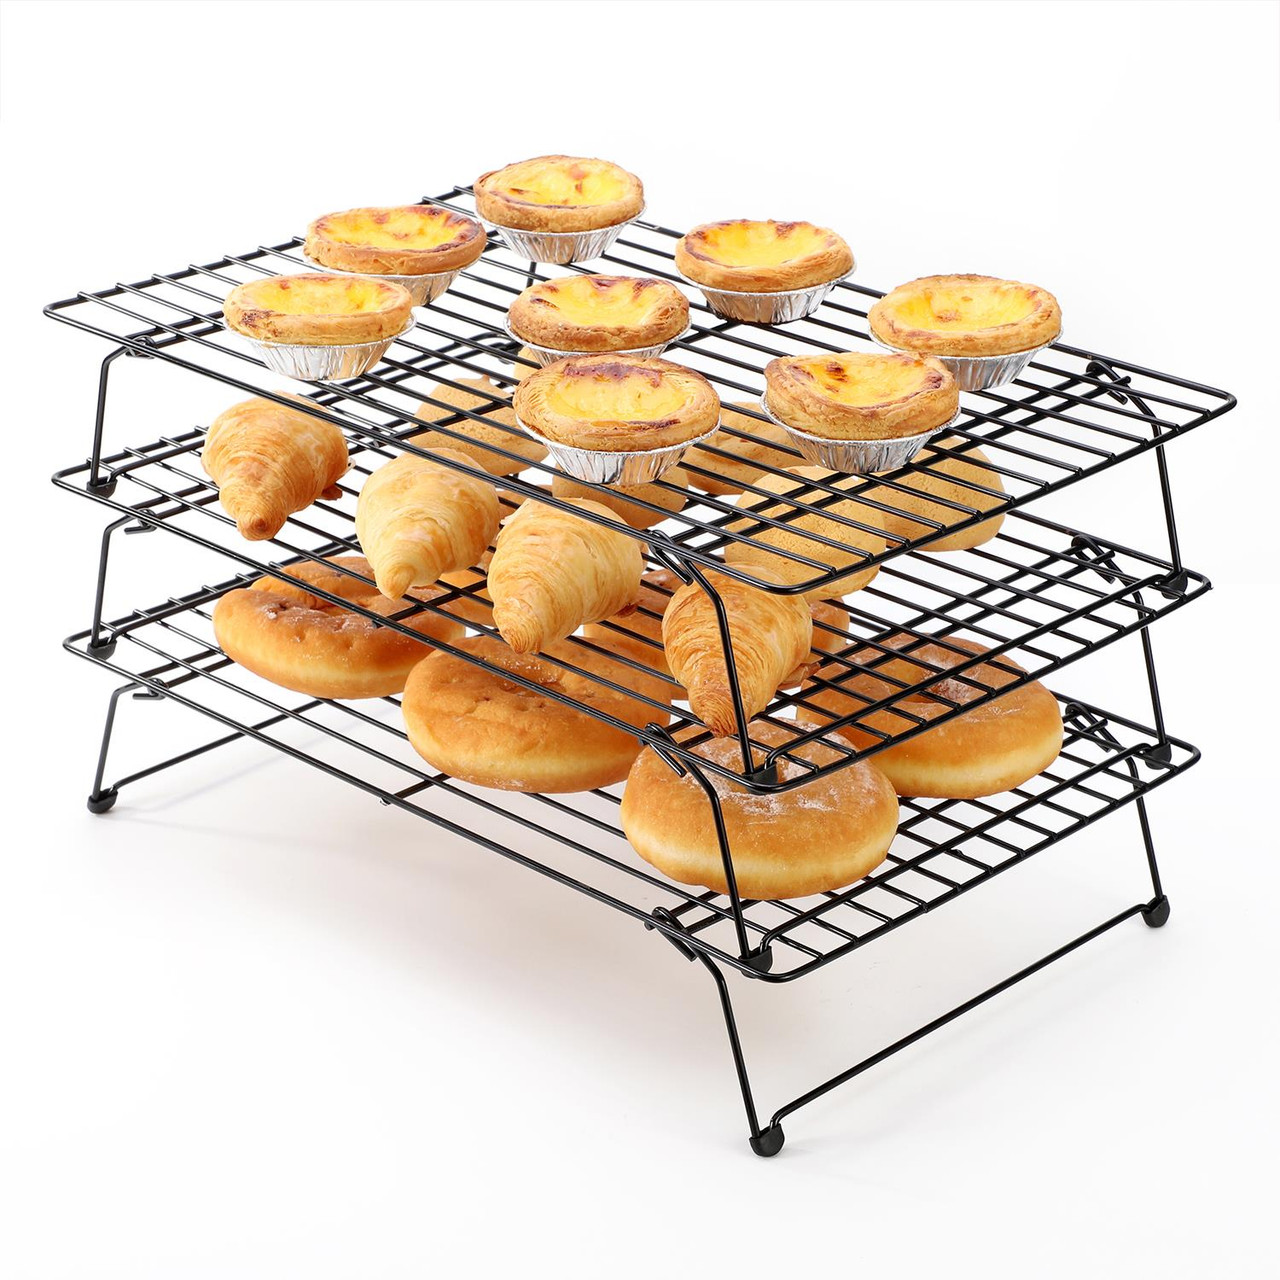 Vinsani Set of 3 High-Carbon Steel Tier Non-Stick Cooling Rack, Collapsible  & Expanded Wire Rack Cooling Oven Tray